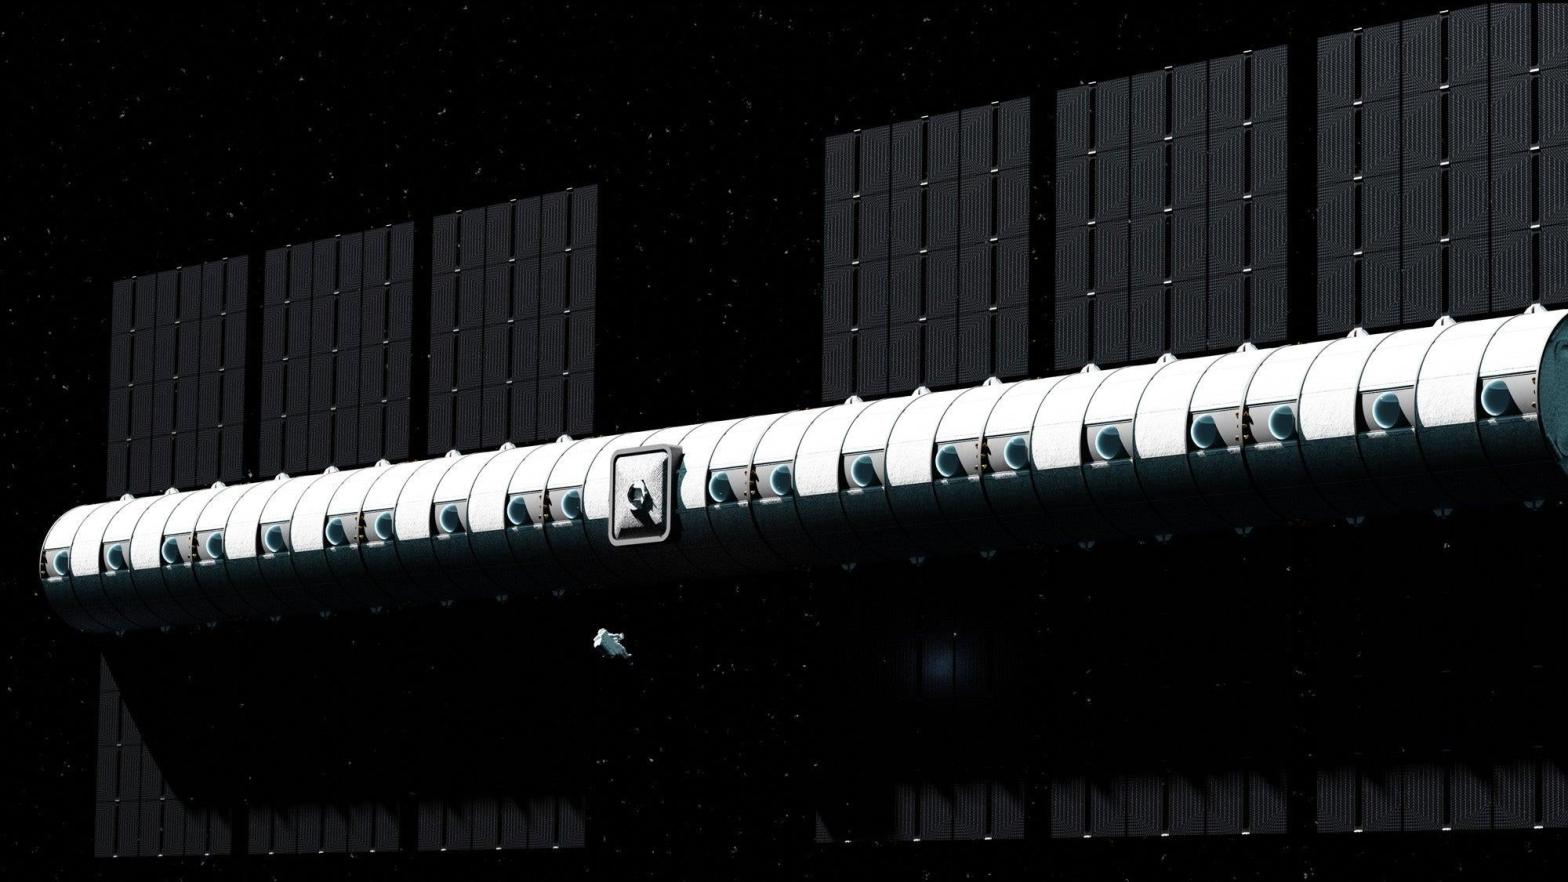 Vast has not released many details about the station, except that the station's artificial gravity will be generated with centrifugal force and that it will serve as a research platform and machine shop. (Illustration: Vast)